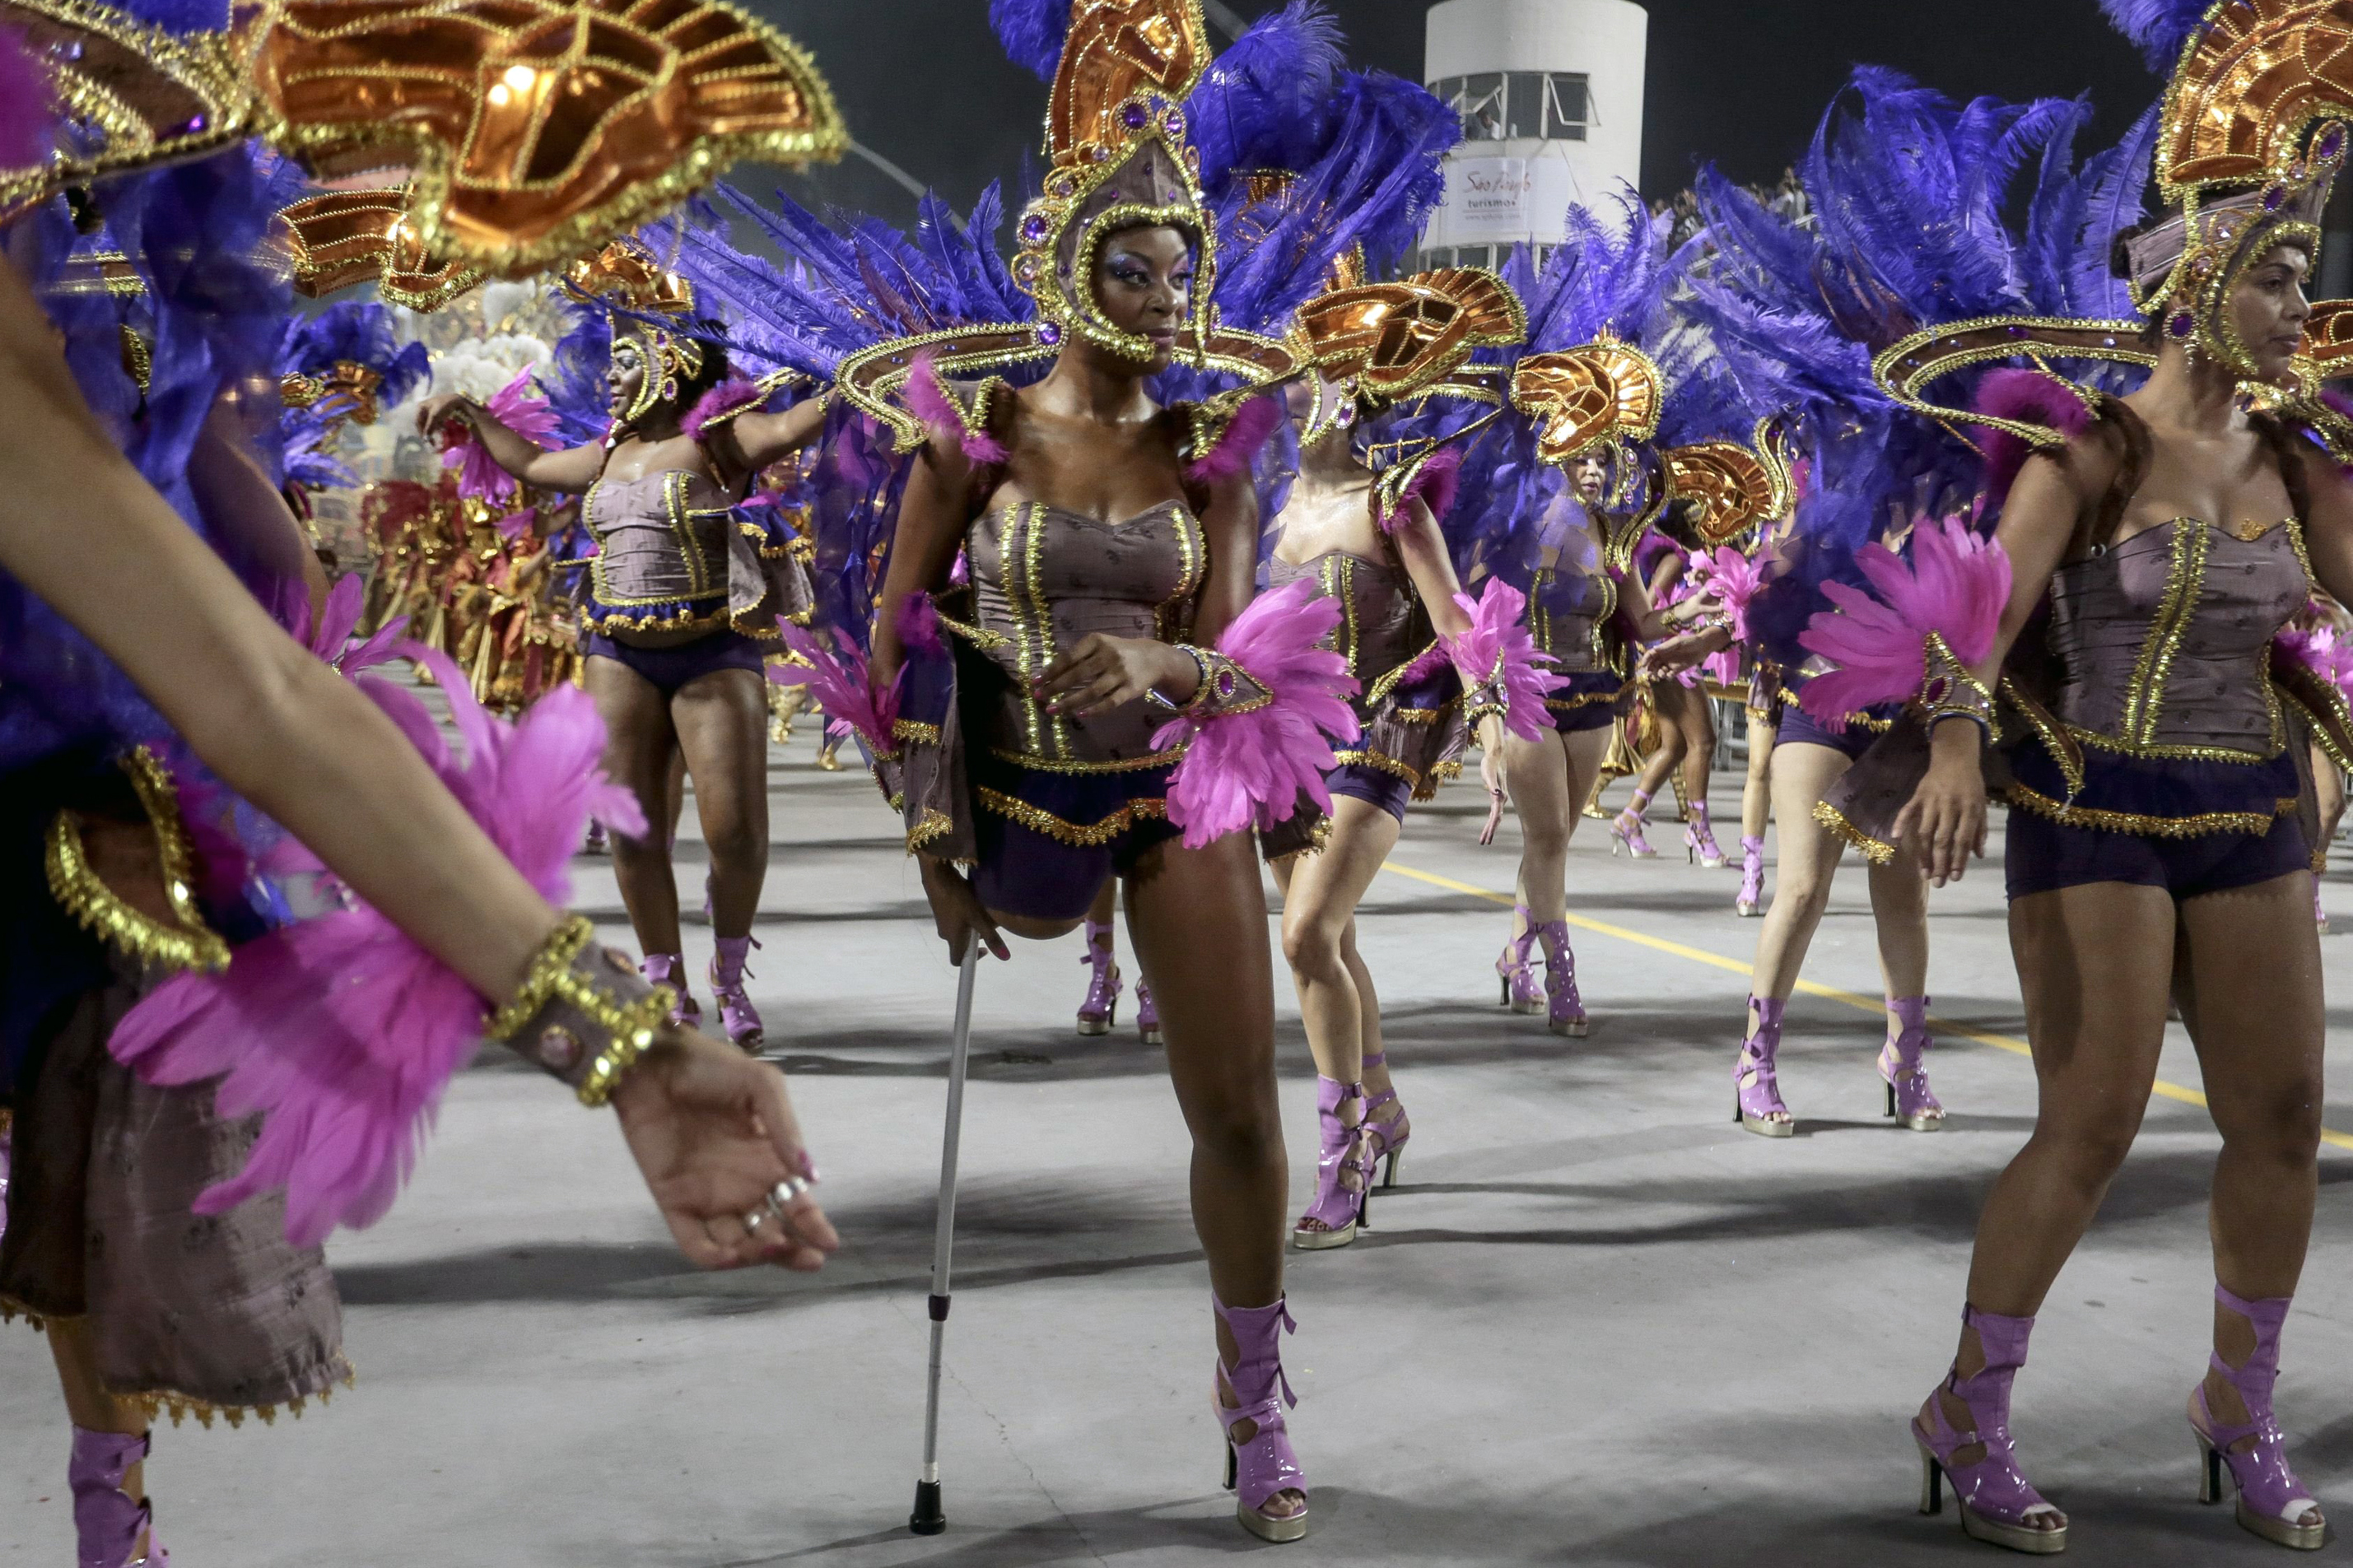 Revelers of the Nene de Vila Matilde samba school perform during the second night of the carnival parade in Sao Paulo on March 1, 2014.